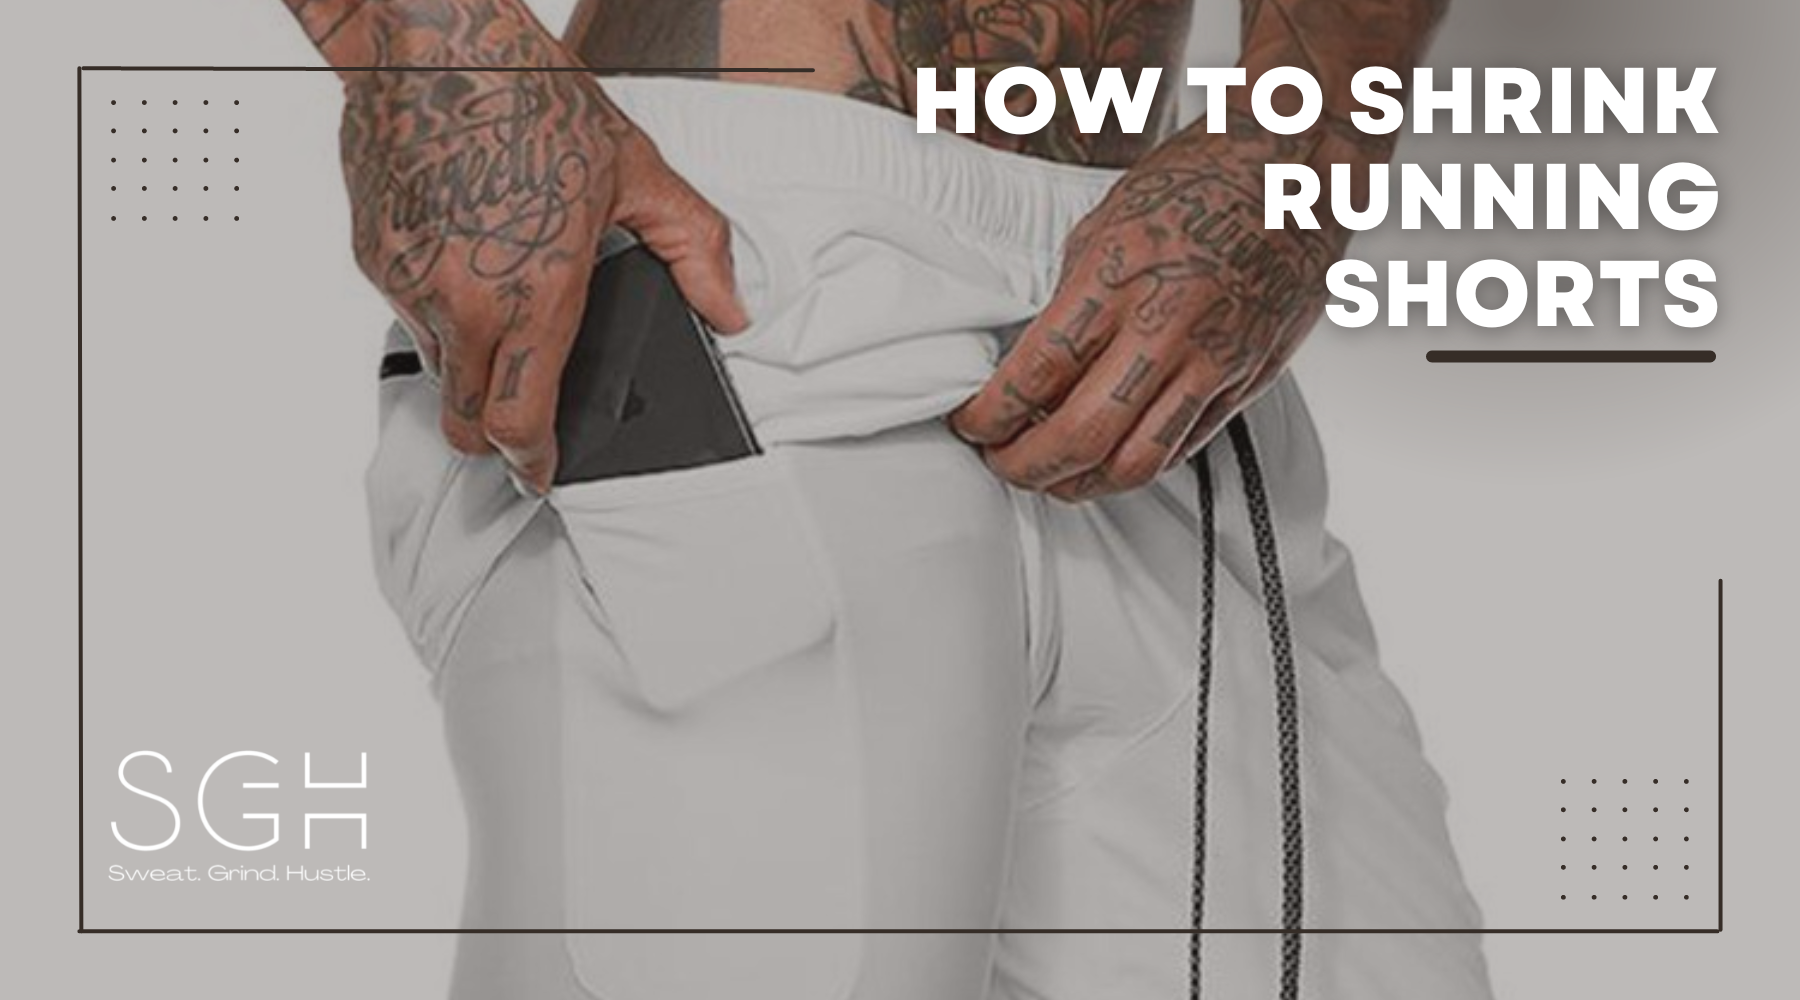 How to Shrink Running Shorts